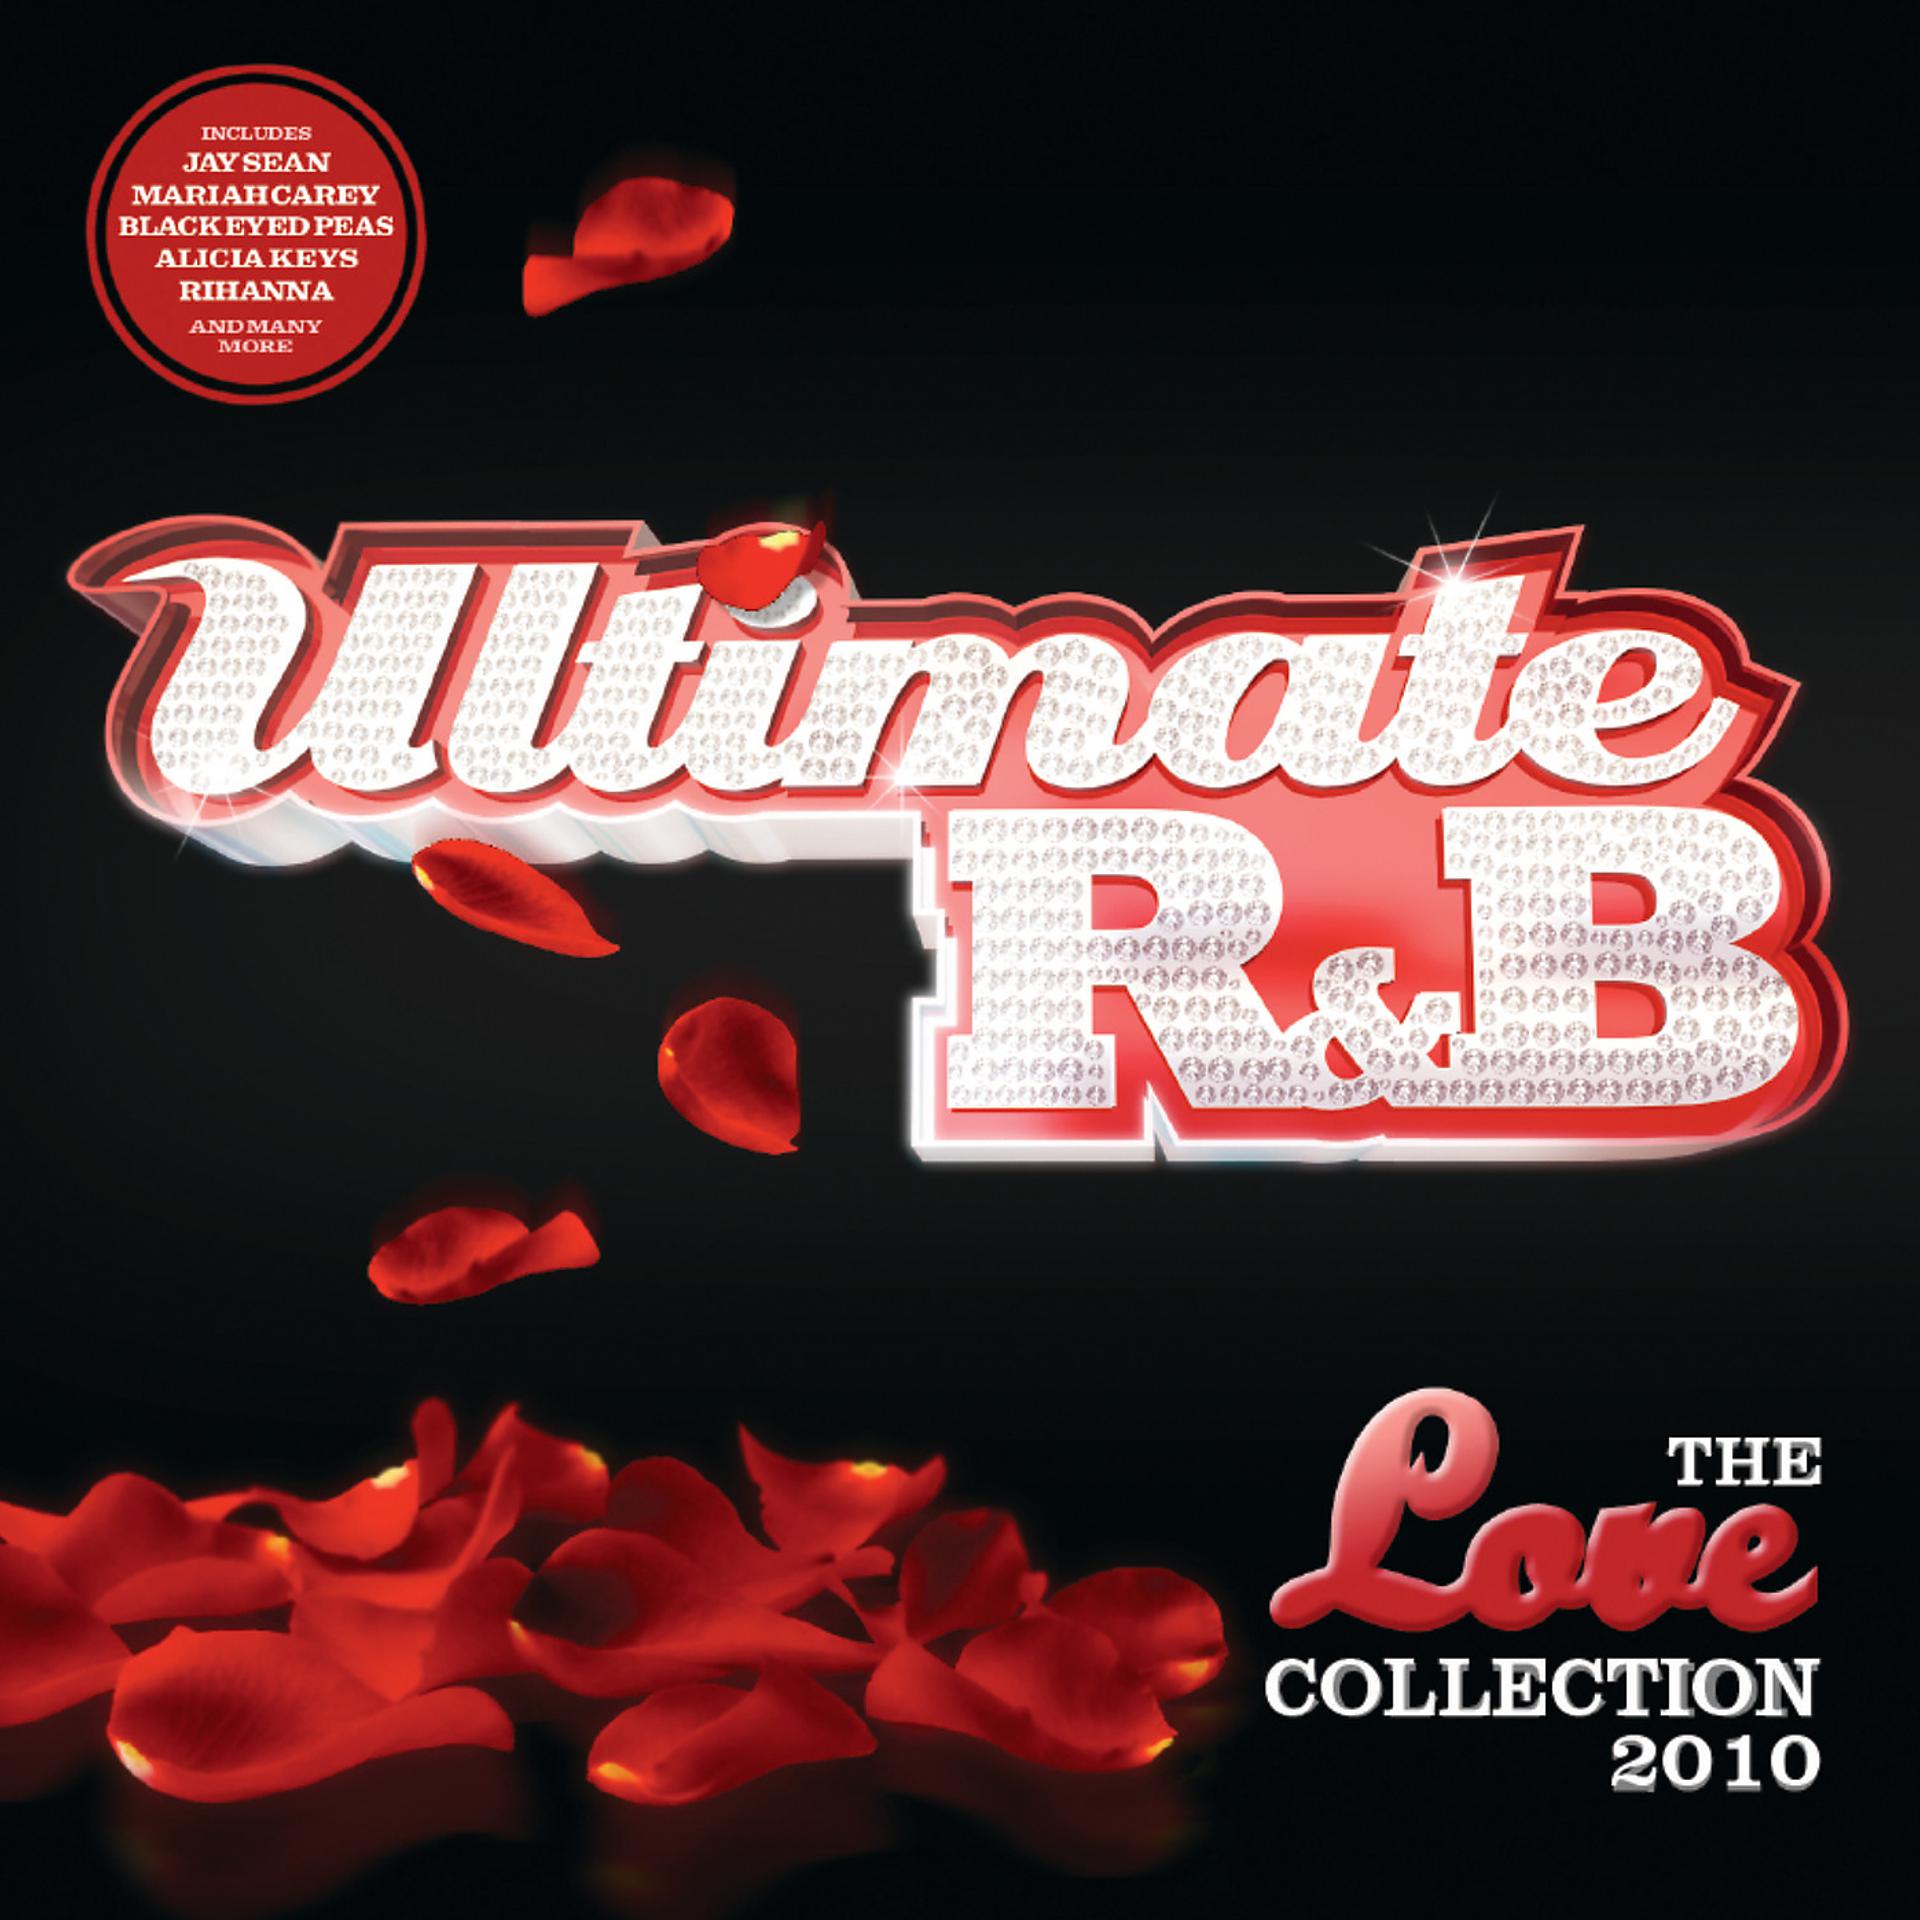 R&B Ultimate. Ultimate r&b the Love collection 2010. Диск Love collection. R&B обложки. Collection 2010